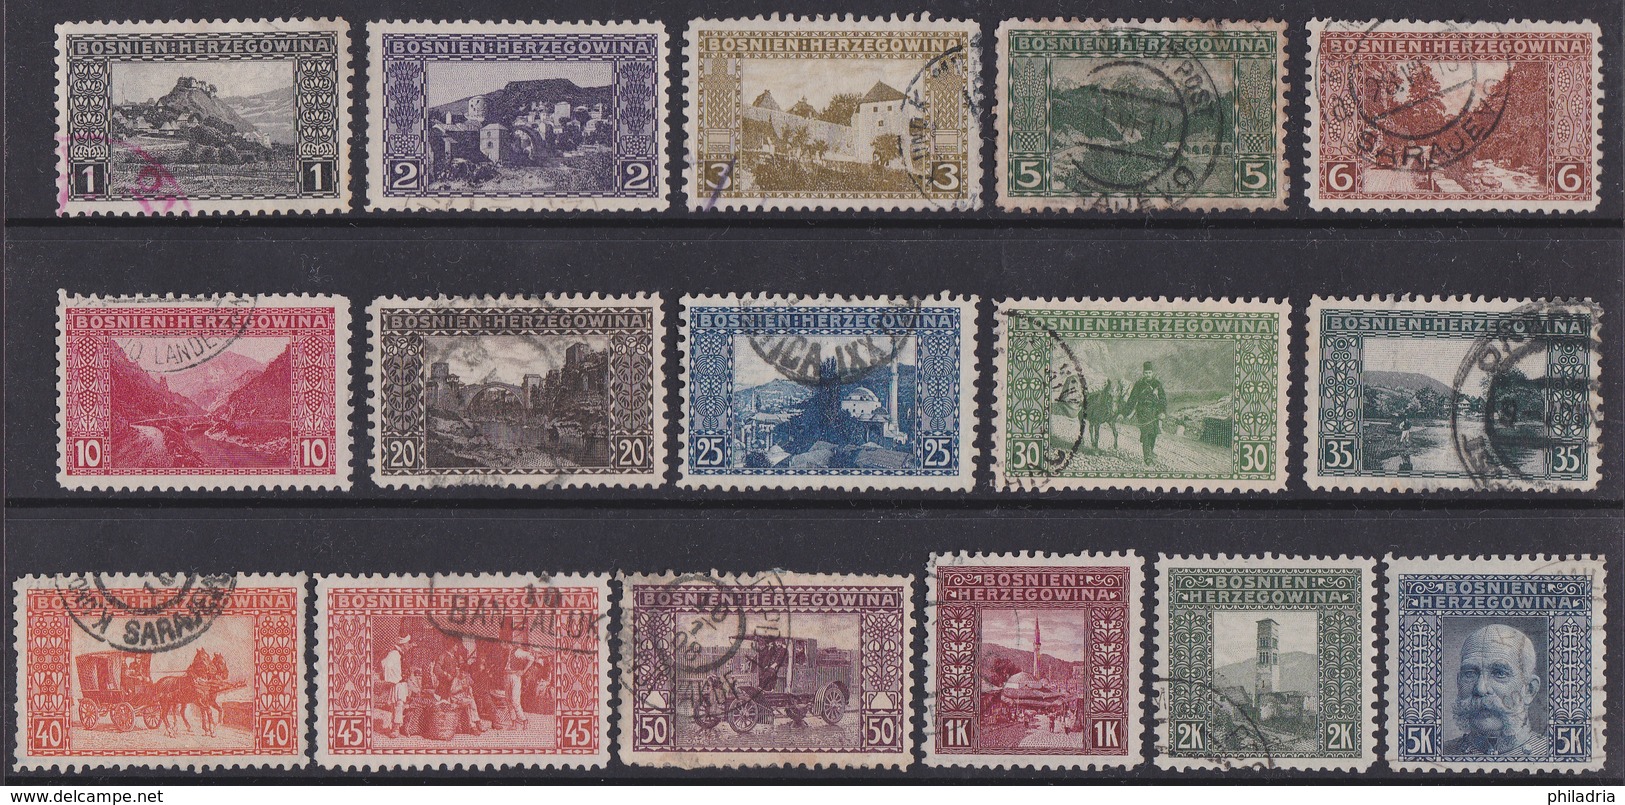 Bosnia, Landscapes, Complete Set, Used, Perforation 9 1/4, Few Stamps Some Shorter Perfs, See Picture - Bosnia And Herzegovina